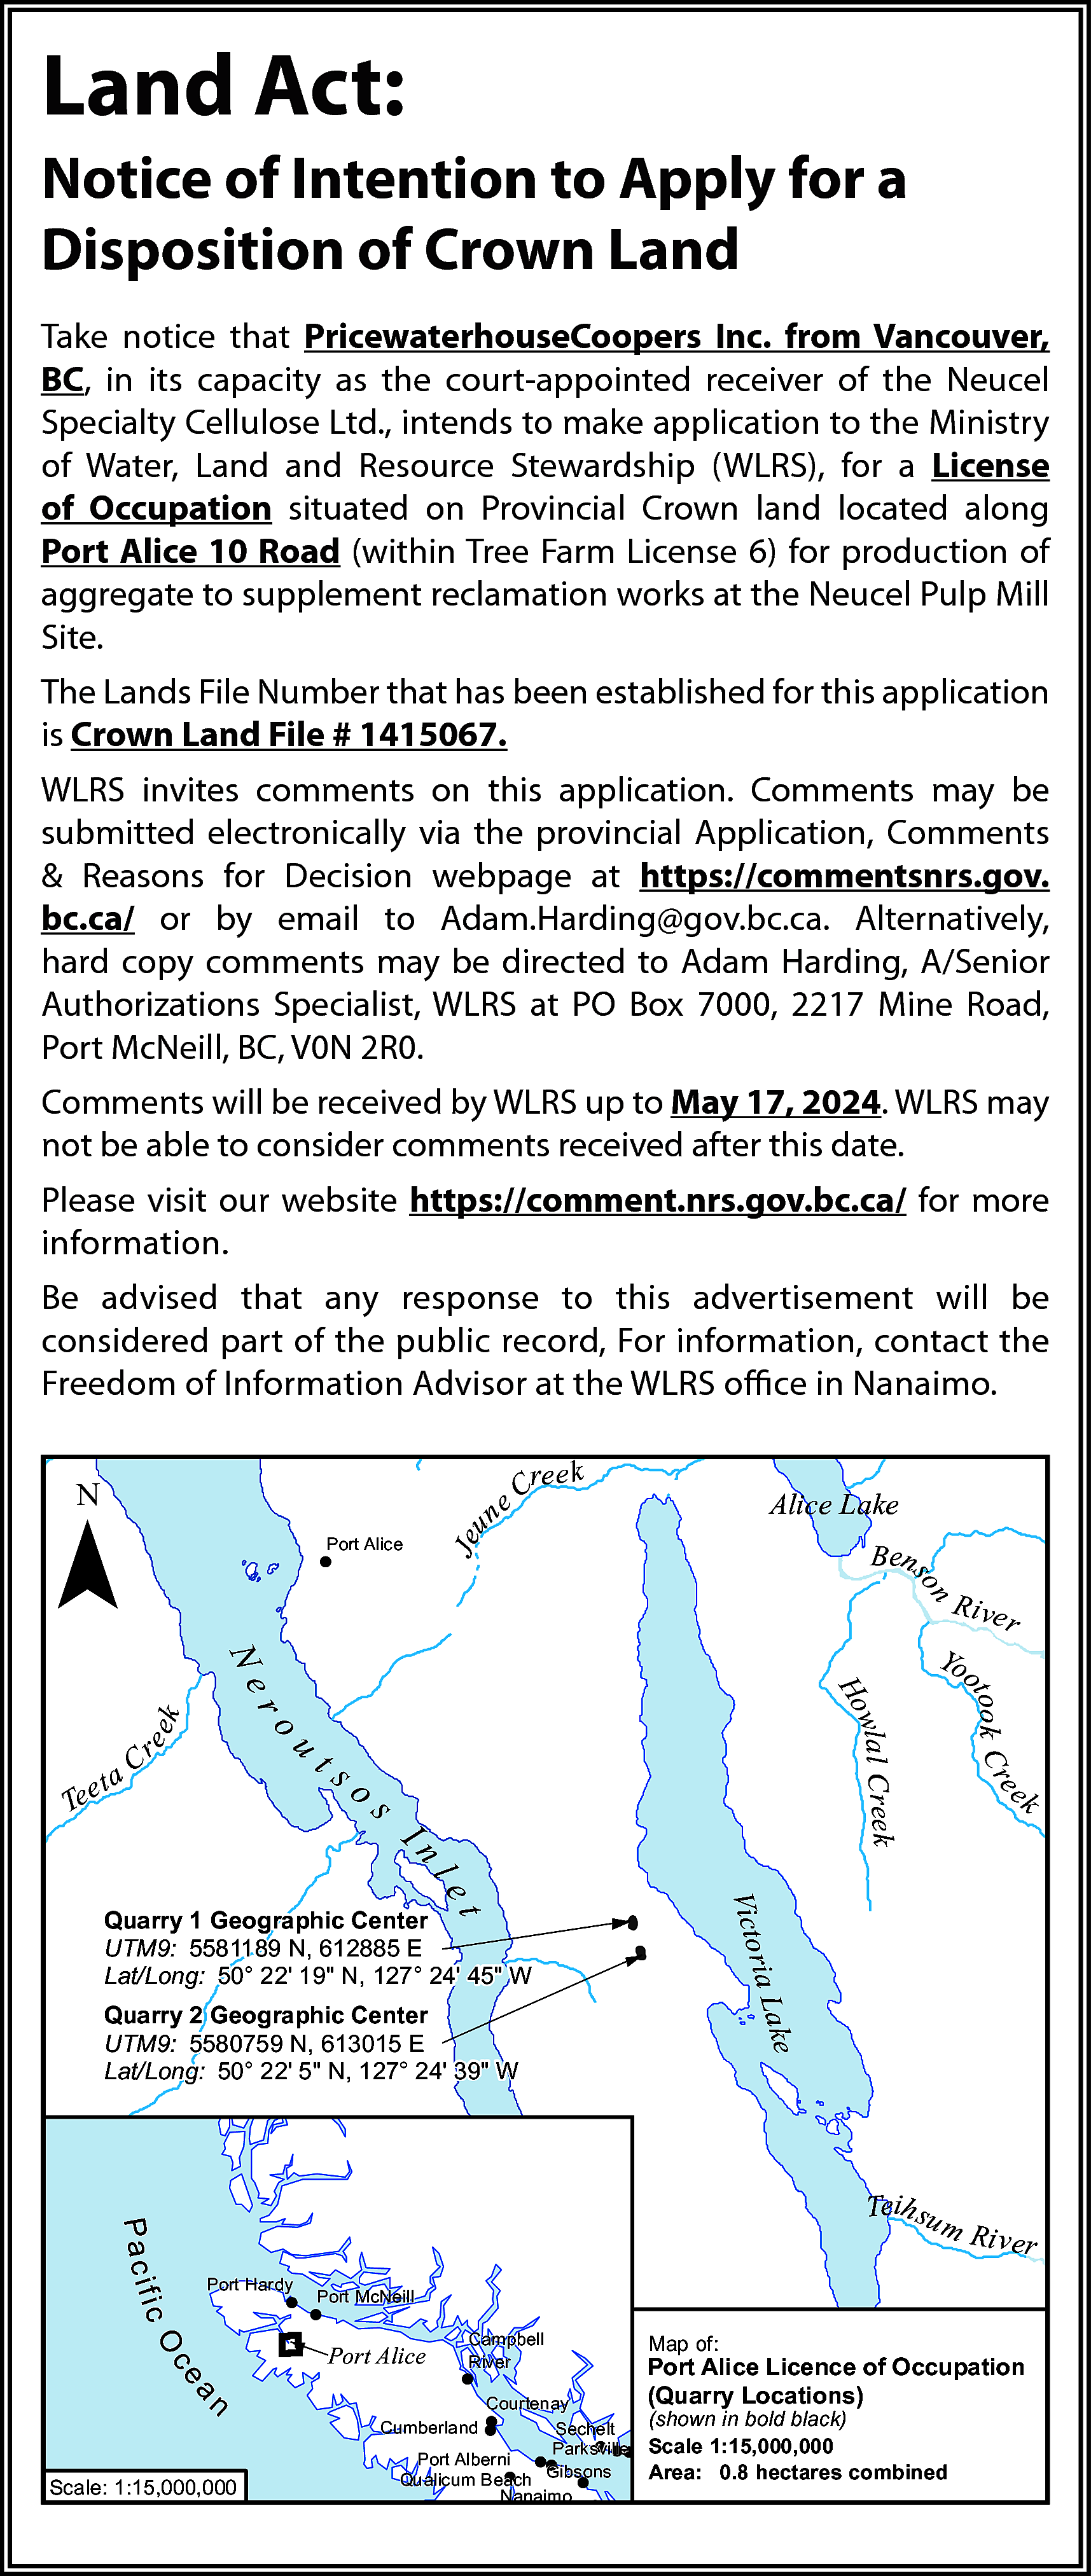 Land Act: <br>Notice of Intention  Land Act:  Notice of Intention to Apply for a  Disposition of Crown Land  Take notice that PricewaterhouseCoopers Inc. from Vancouver,  BC, in its capacity as the court-appointed receiver of the Neucel  Specialty Cellulose Ltd., intends to make application to the Ministry  of Water, Land and Resource Stewardship (WLRS), for a License  of Occupation situated on Provincial Crown land located along  Port Alice 10 Road (within Tree Farm License 6) for production of  aggregate to supplement reclamation works at the Neucel Pulp Mill  Site.  The Lands File Number that has been established for this application  is Crown Land File # 1415067.  WLRS invites comments on this application. Comments may be  submitted electronically via the provincial Application, Comments  & Reasons for Decision webpage at https://commentsnrs.gov.  bc.ca/ or by email to Adam.Harding@gov.bc.ca. Alternatively,  hard copy comments may be directed to Adam Harding, A/Senior  Authorizations Specialist, WLRS at PO Box 7000, 2217 Mine Road,  Port McNeill, BC, V0N 2R0.  Comments will be received by WLRS up to May 17, 2024. WLRS may  not be able to consider comments received after this date.  Please visit our website https://comment.nrs.gov.bc.ca/ for more  information.  Be advised that any response to this advertisement will be  considered part of the public record, For information, contact the  Freedom of Information Advisor at the WLRS office in Nanaimo.    ¯    un    Alice Lake    Je    Port Alice    ree k  eC    n  so    Ben    R ive    k    ee    r    ts    u    aC    I    k    e    os    r    e  ook C r  ot    ro    t  Tee    ek  wlal C re  Ho    Ne    Yo    nl  r  Victo    et    ia La    Quarry 1 Geographic Center  UTM9: 5581189 N, 612885 E  Lat/Long: 50° 22 19" N, 127° 24 45" W    ke    Quarry 2 Geographic Center  UTM9: 5580759 N, 613015 E  Lat/Long: 50° 22 5" N, 127° 24 39" W    Scale: 1:15,000,000    (shown in bold black)  Scale 1:15,000,000  Area: 0.8 hectares combined    i v er    Ut    k    y    le R    a    Courtenay  Cumberland  Sechelt  Parksville  Port Alberni  Gibsons  Qualicum Beach  Nanaimo    Map  C a of:    e g h Licence of Occupation  Port Alice  l e Cre  (Quarry Locations)  ek  rb    ce    Campbell  River    Ma    O    Port Alice    ee    ic    n    m Riv  er    Port McNeill    Cr    Port Hardy    l Cr e e k  C olon i a    l uh    Pa c if    Teih su    